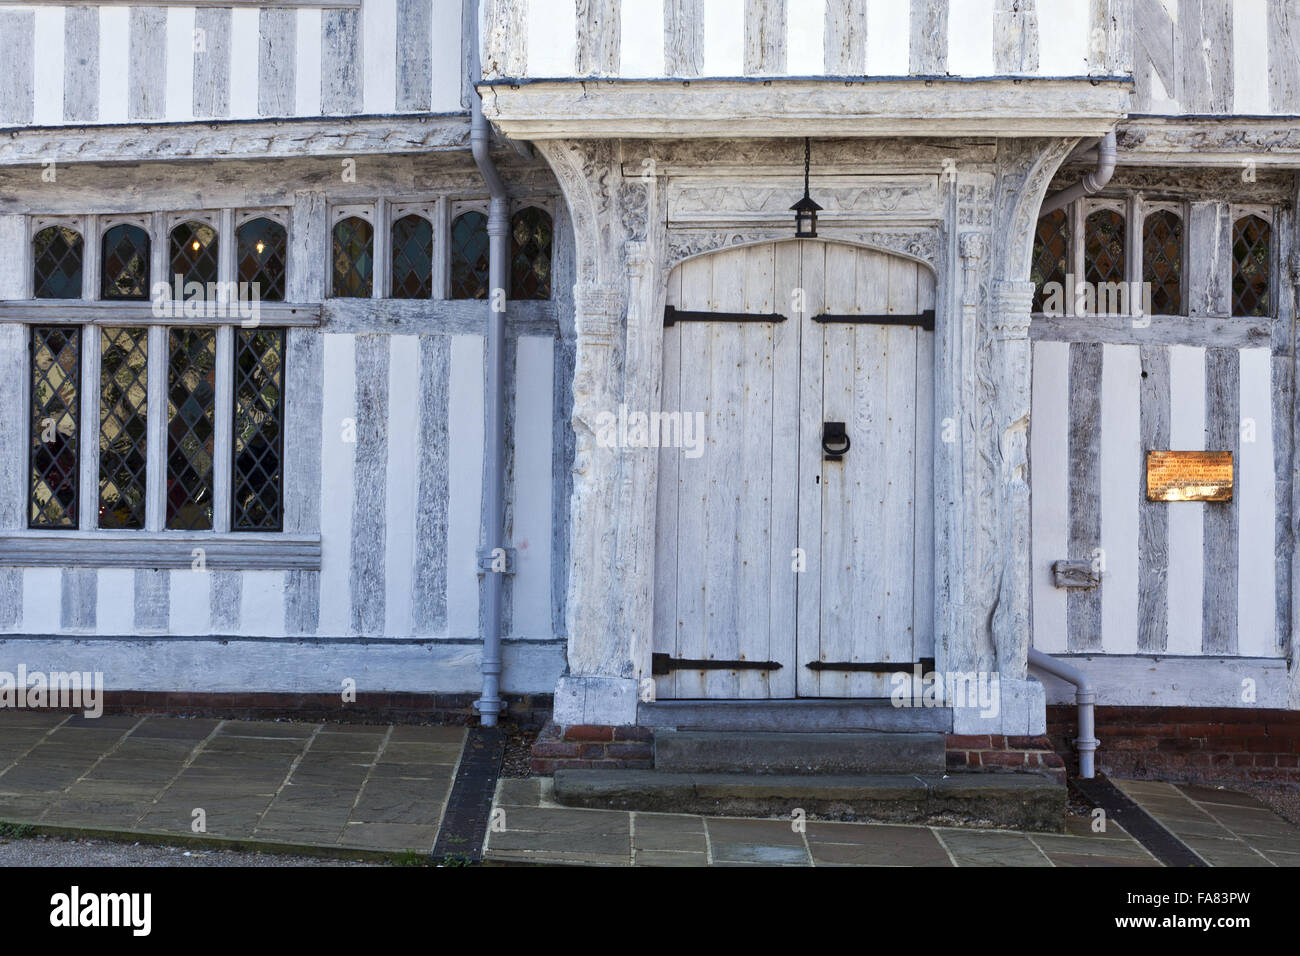 Lavenham Guildhall, Suffolk. The building dates from 1529 and was originally the hall of the Guild of Corpus Christi. Stock Photo